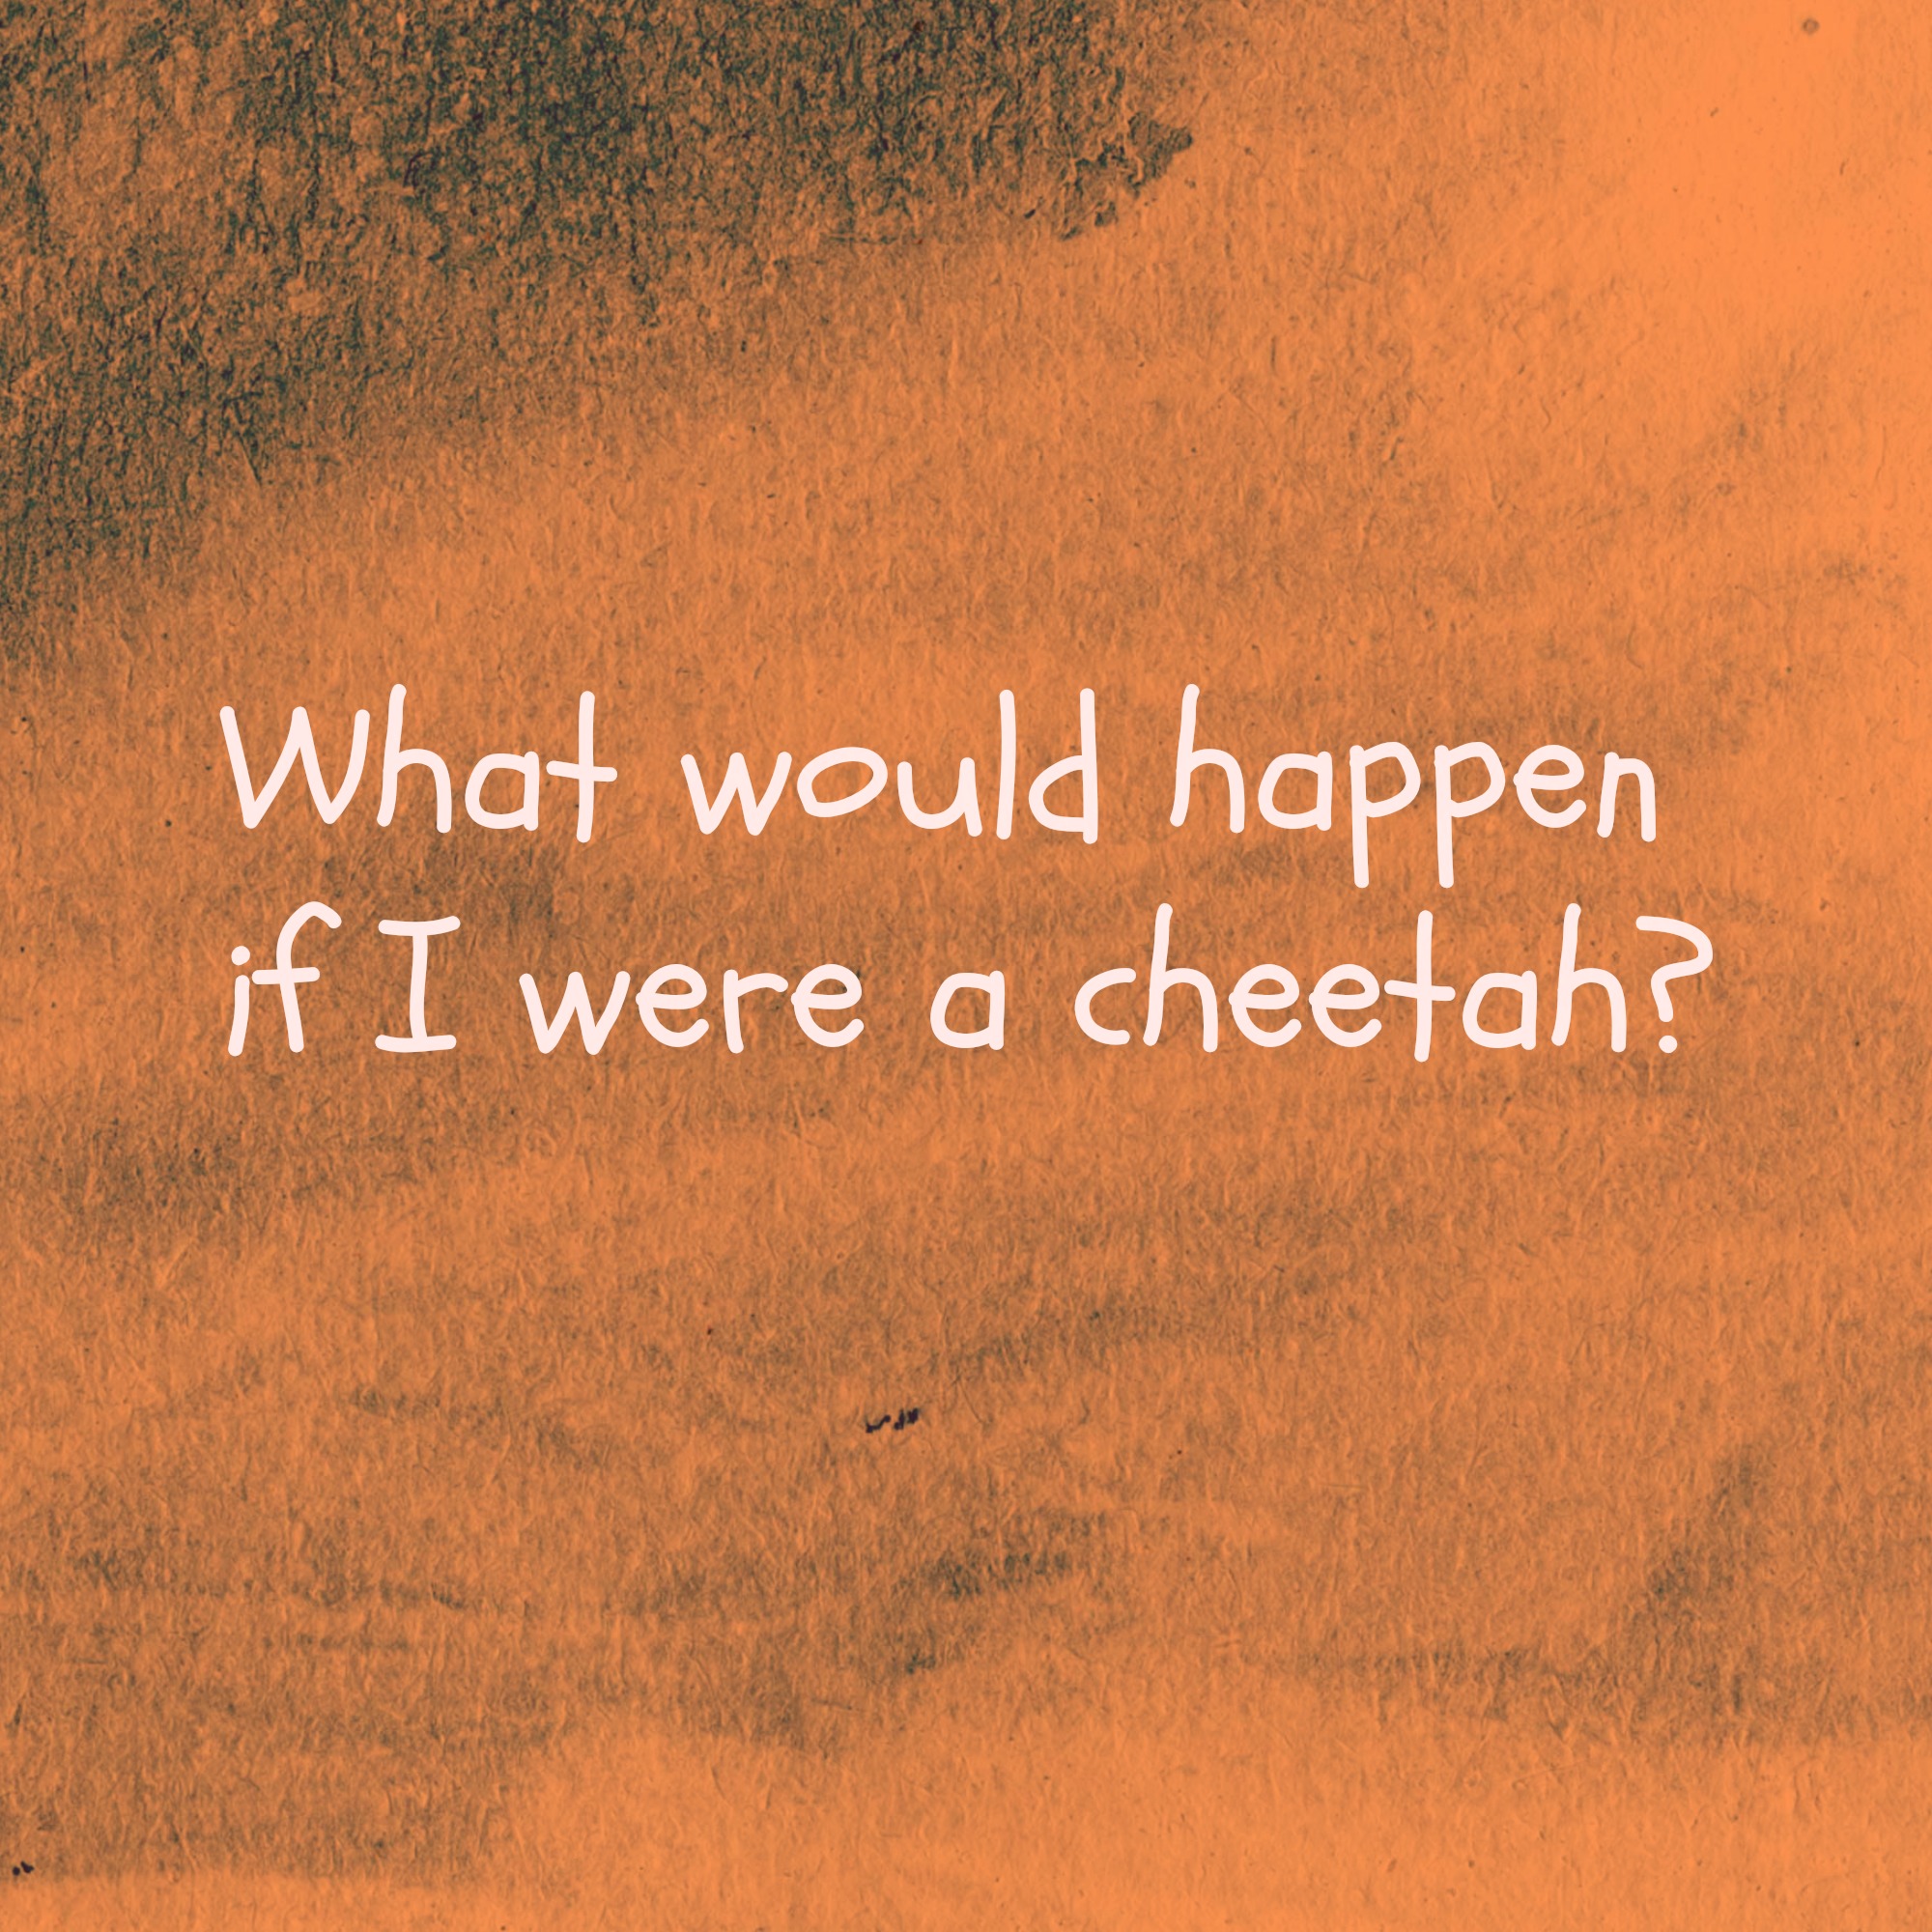 Little Miss I's Journal - If I were a cheetah. - Mami Tales